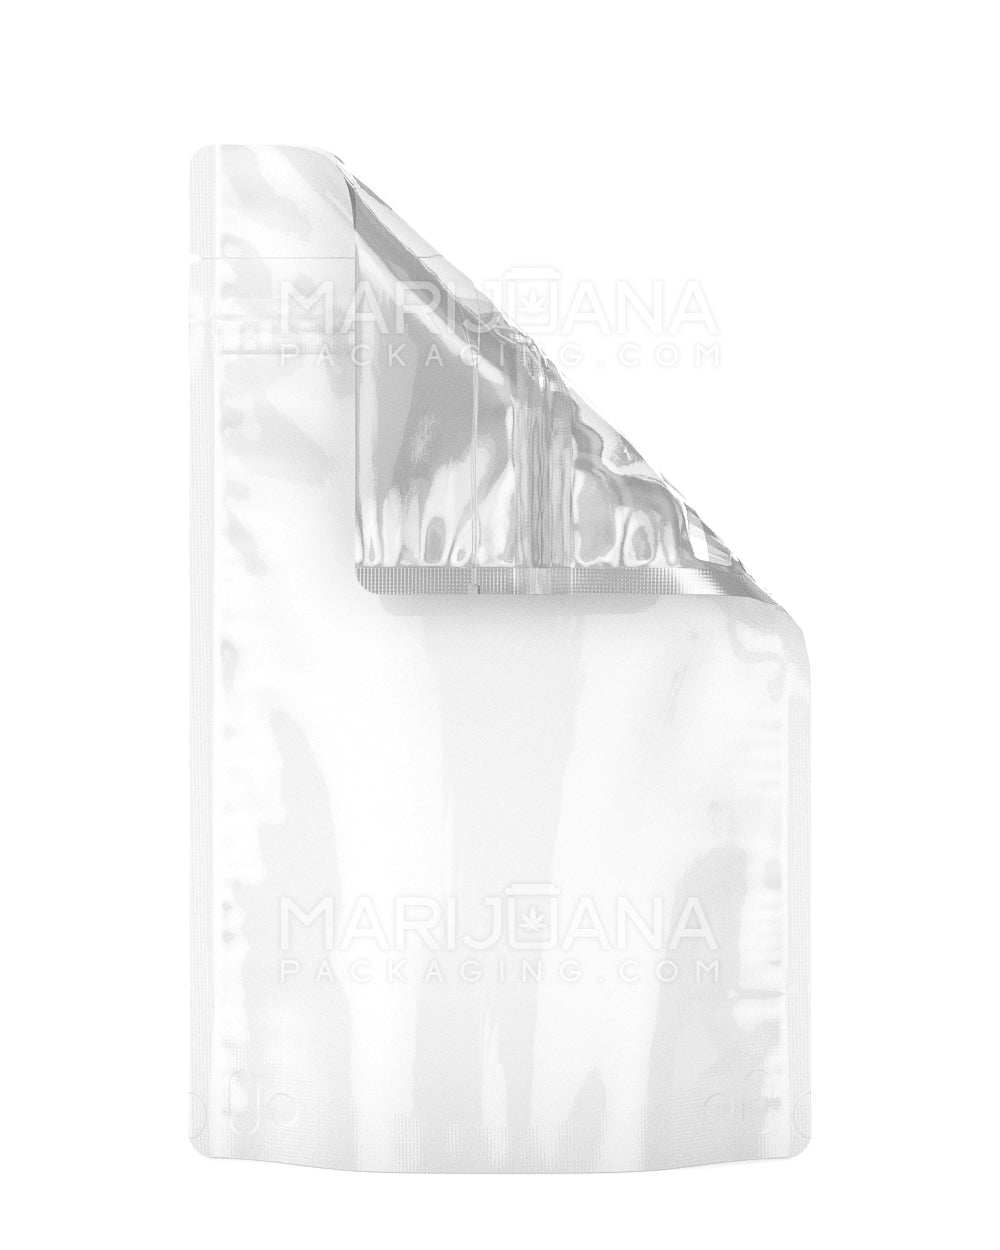 Tamper Evident | Glossy White Mylar Bag (Tear Notch) | 6in x 9.3in - 28g - 1000 Count